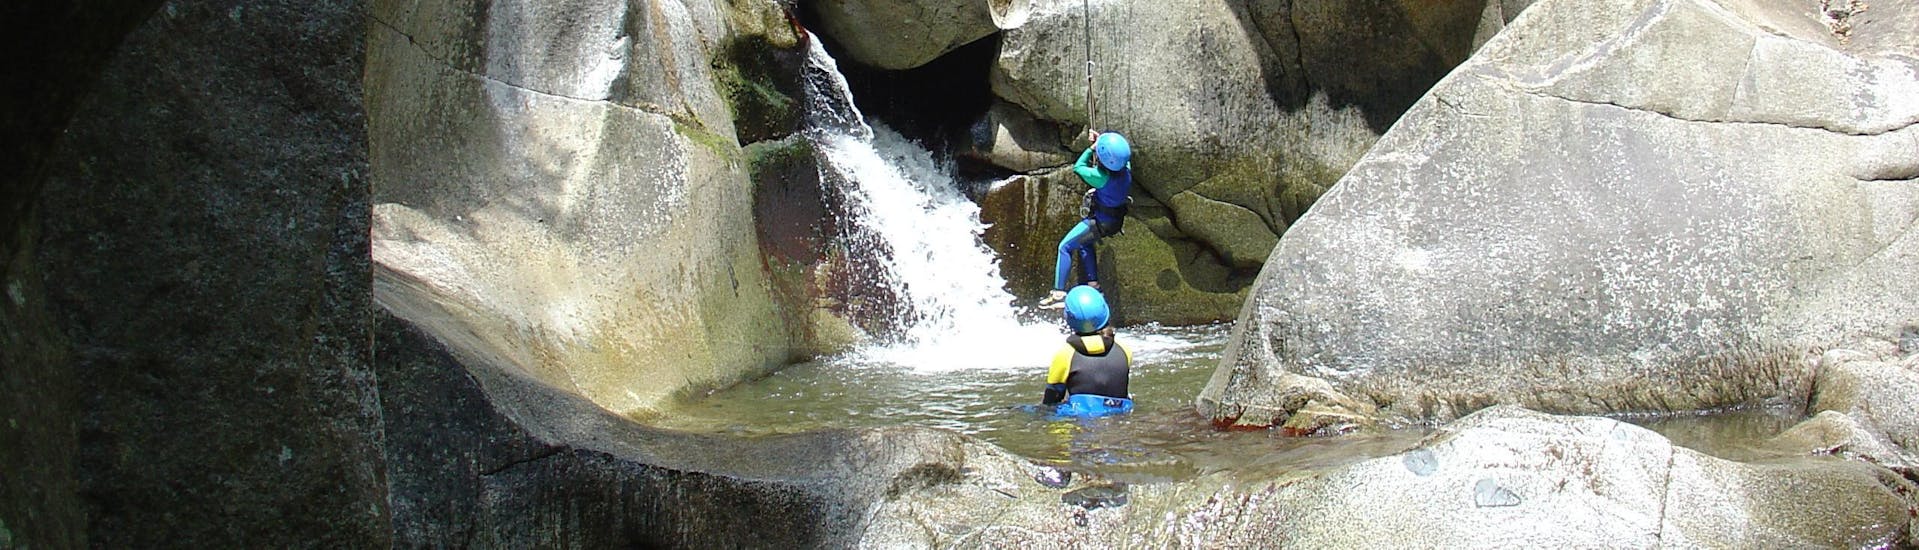 A family is enjoying their Canyoning in Canyon de Molitg Les Bains - Discovery activity with Extérieur Nature.